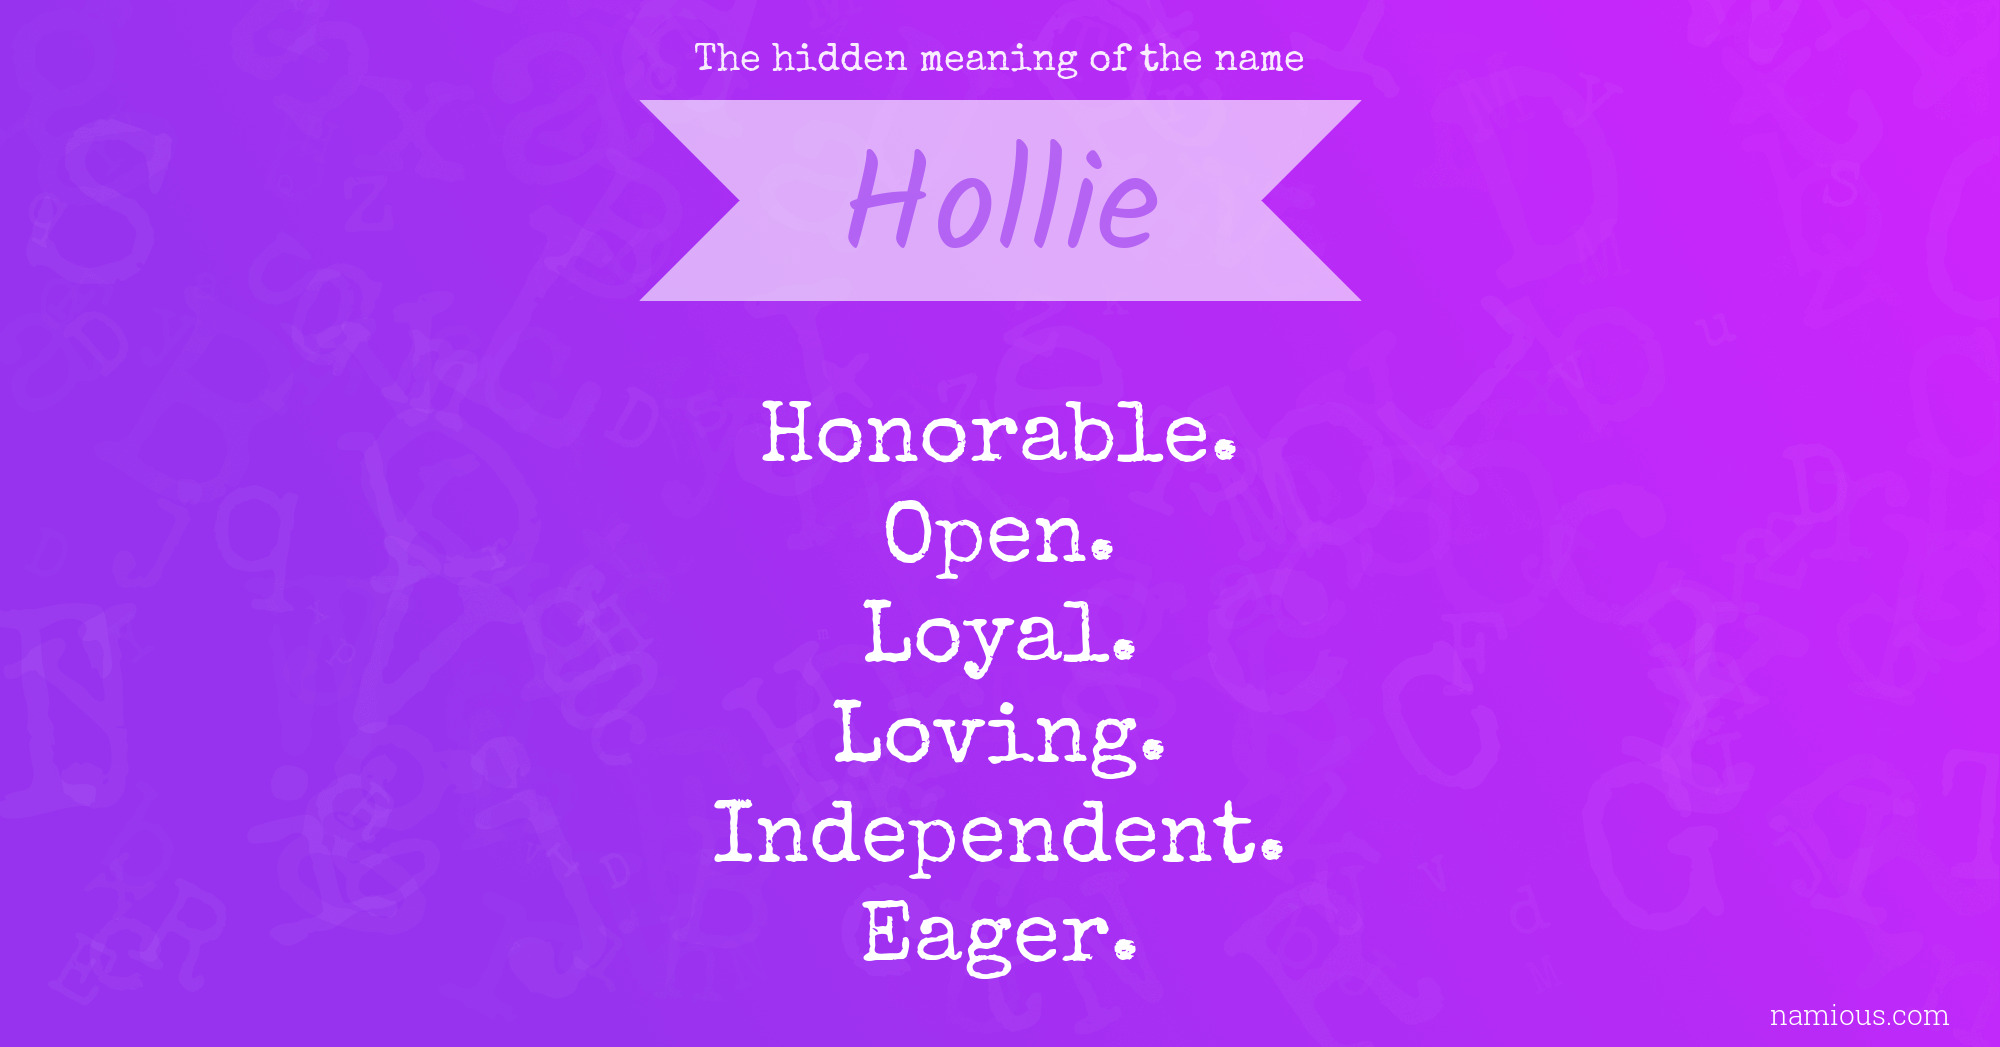 The hidden meaning of the name Hollie | Namious